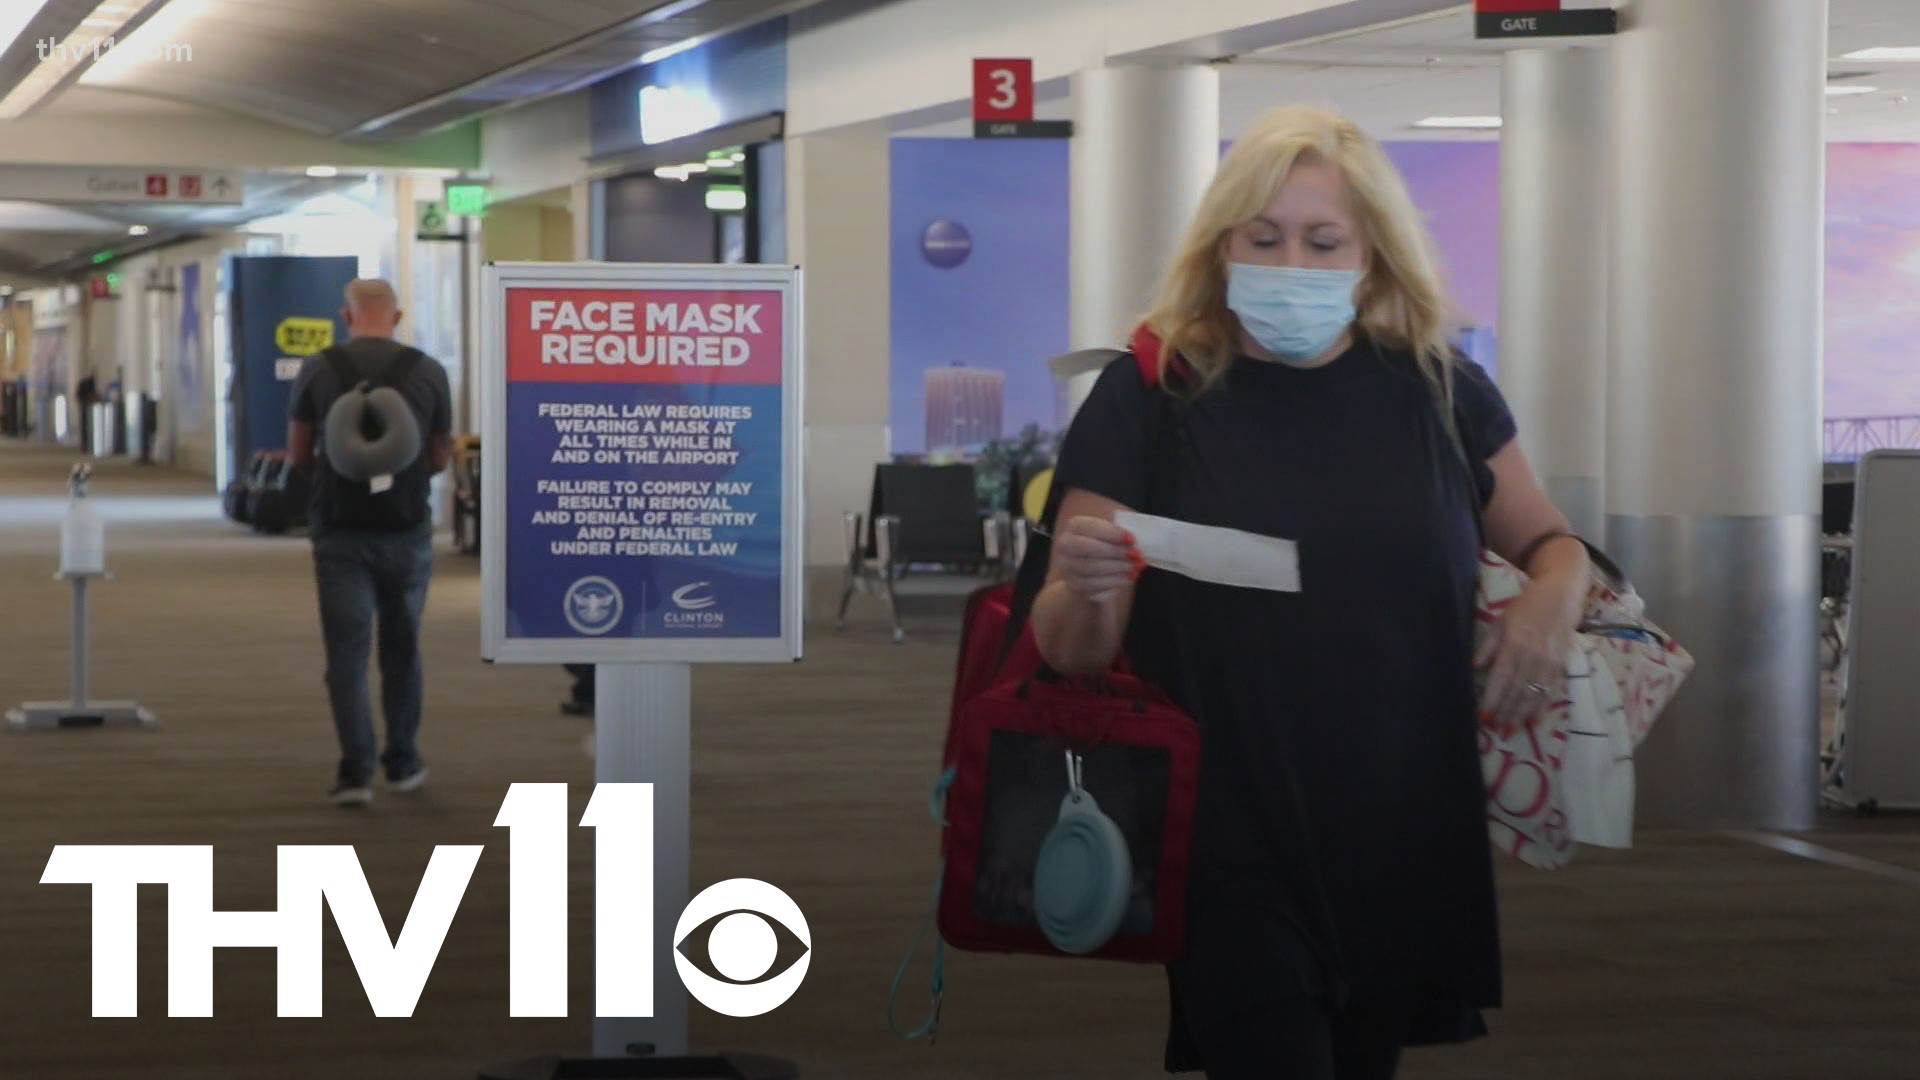 The Clinton National Airport is seeing an increase in traffic, which could mean longer security lines for passengers as more destinations are starting to open up.